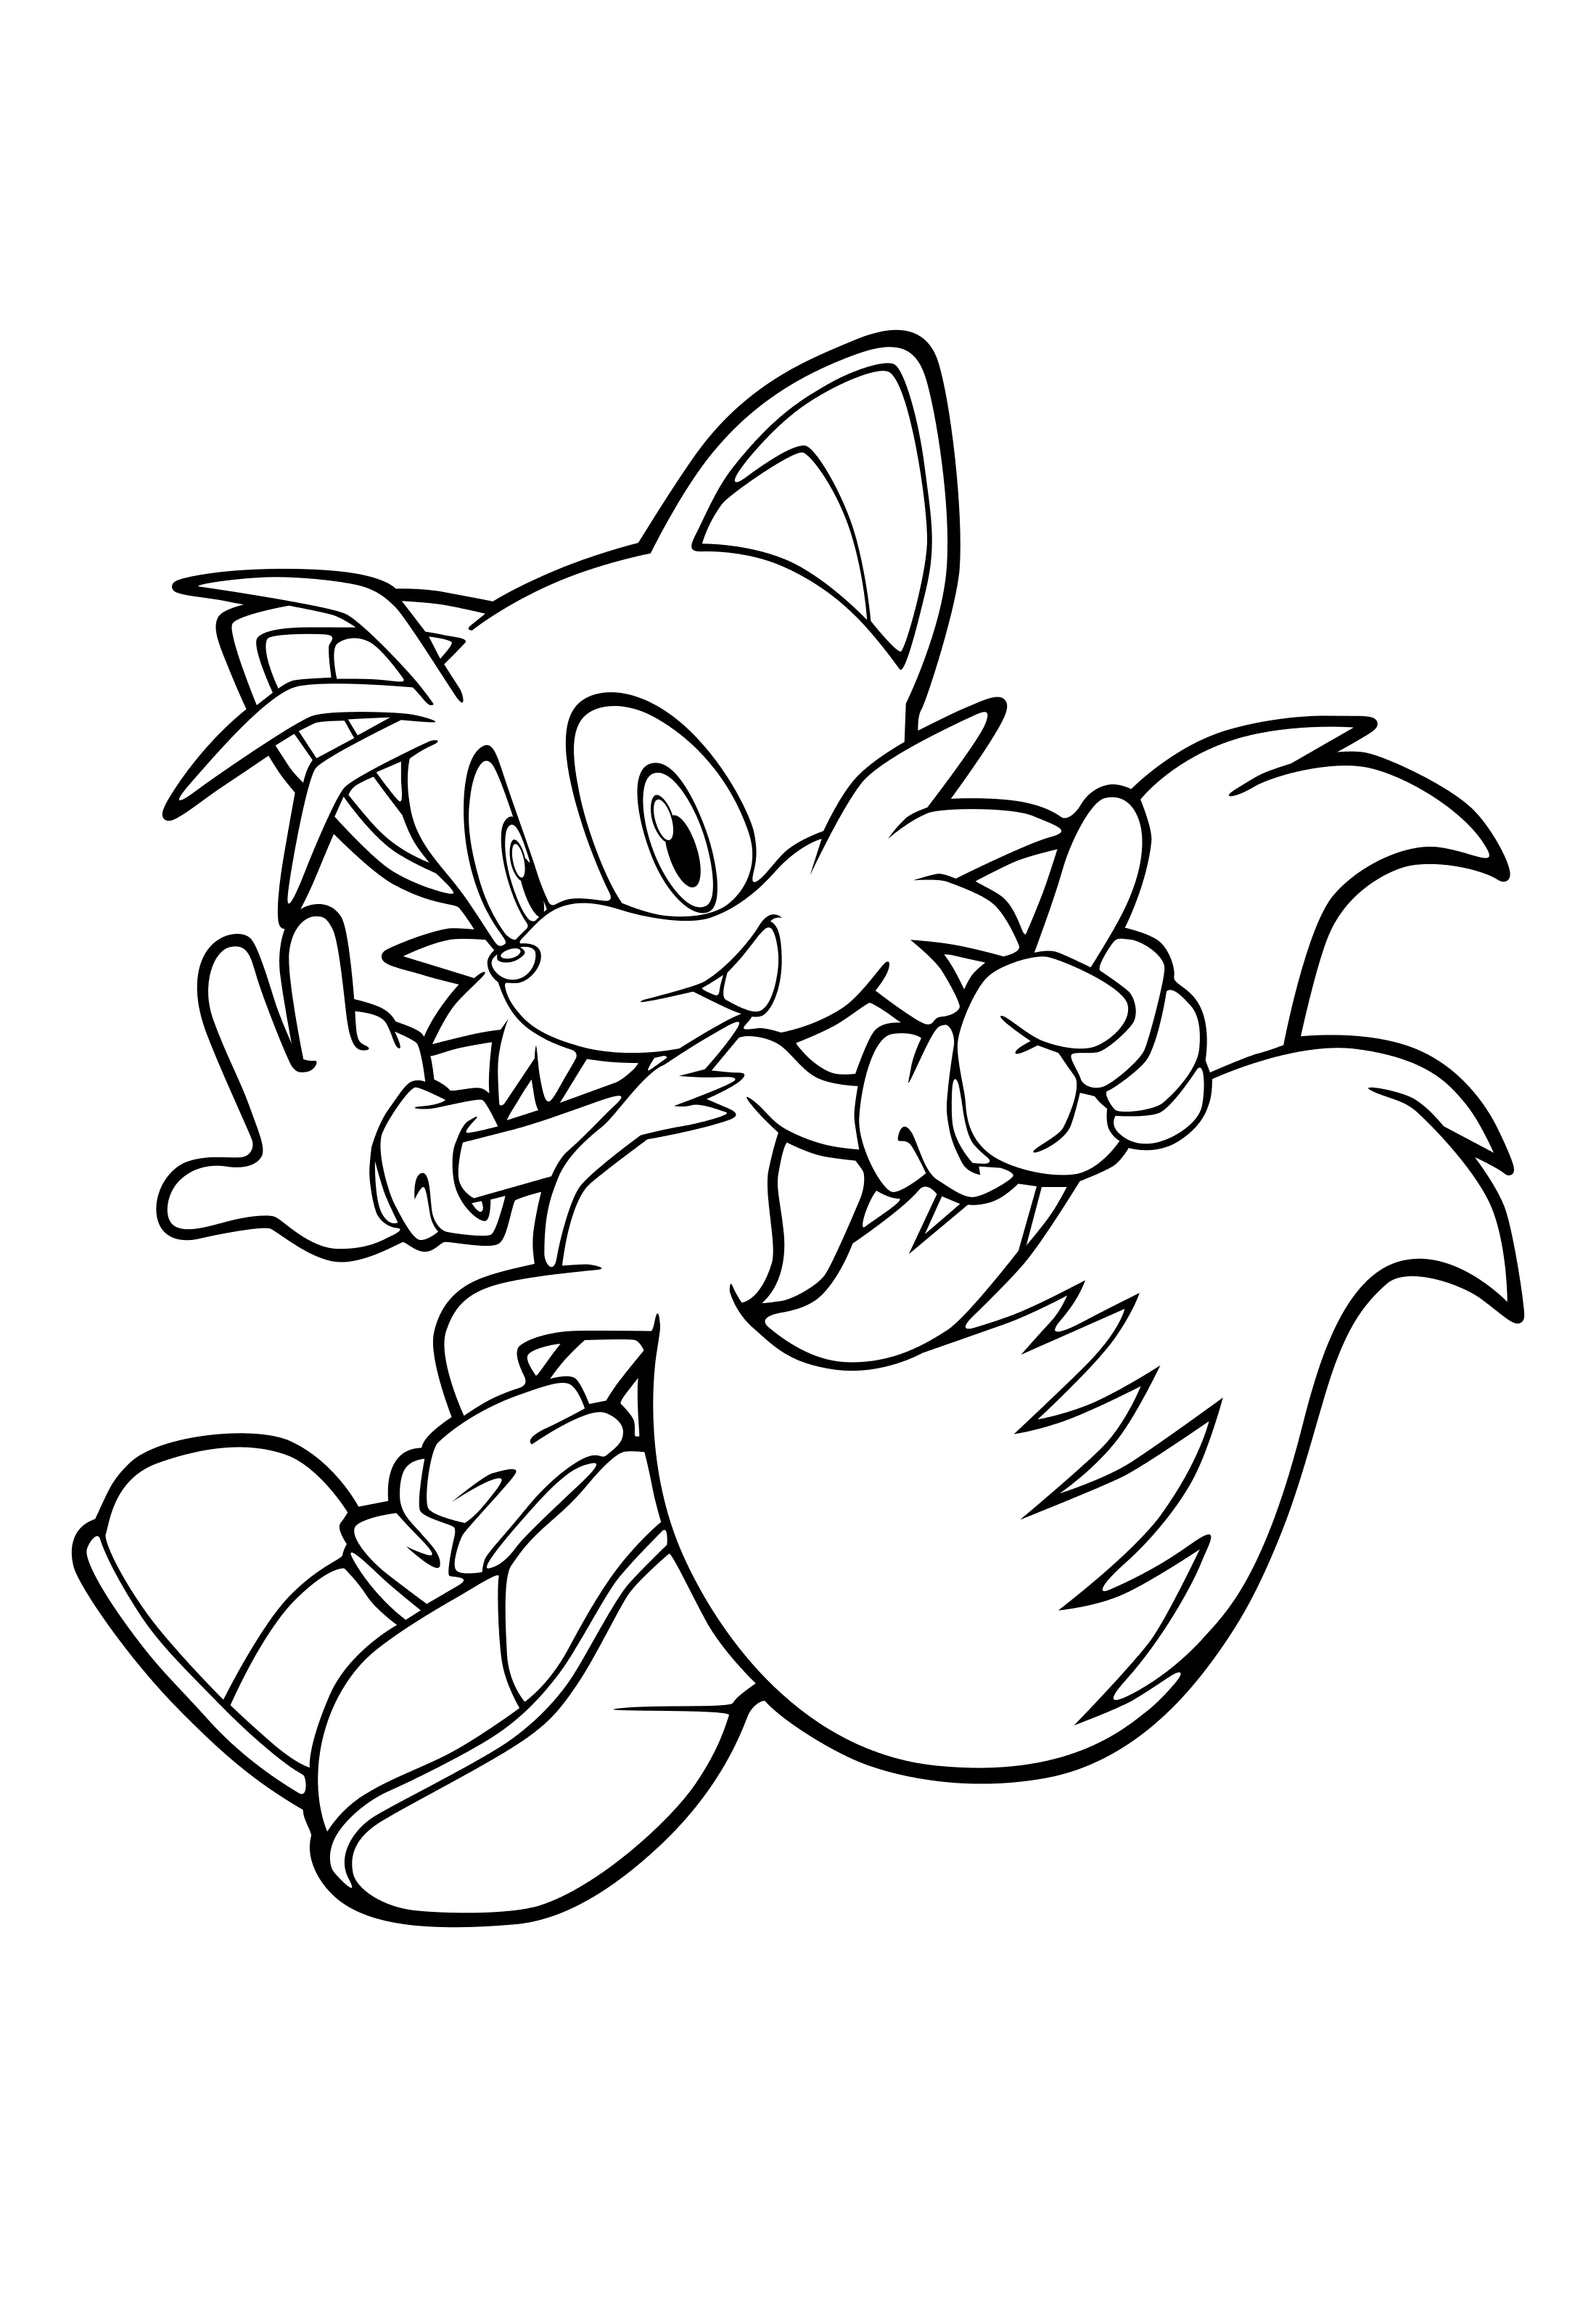 Free Printable Tails The Fox Coloring Pages Pdf - Tails The Fox Coloring Pages To Print